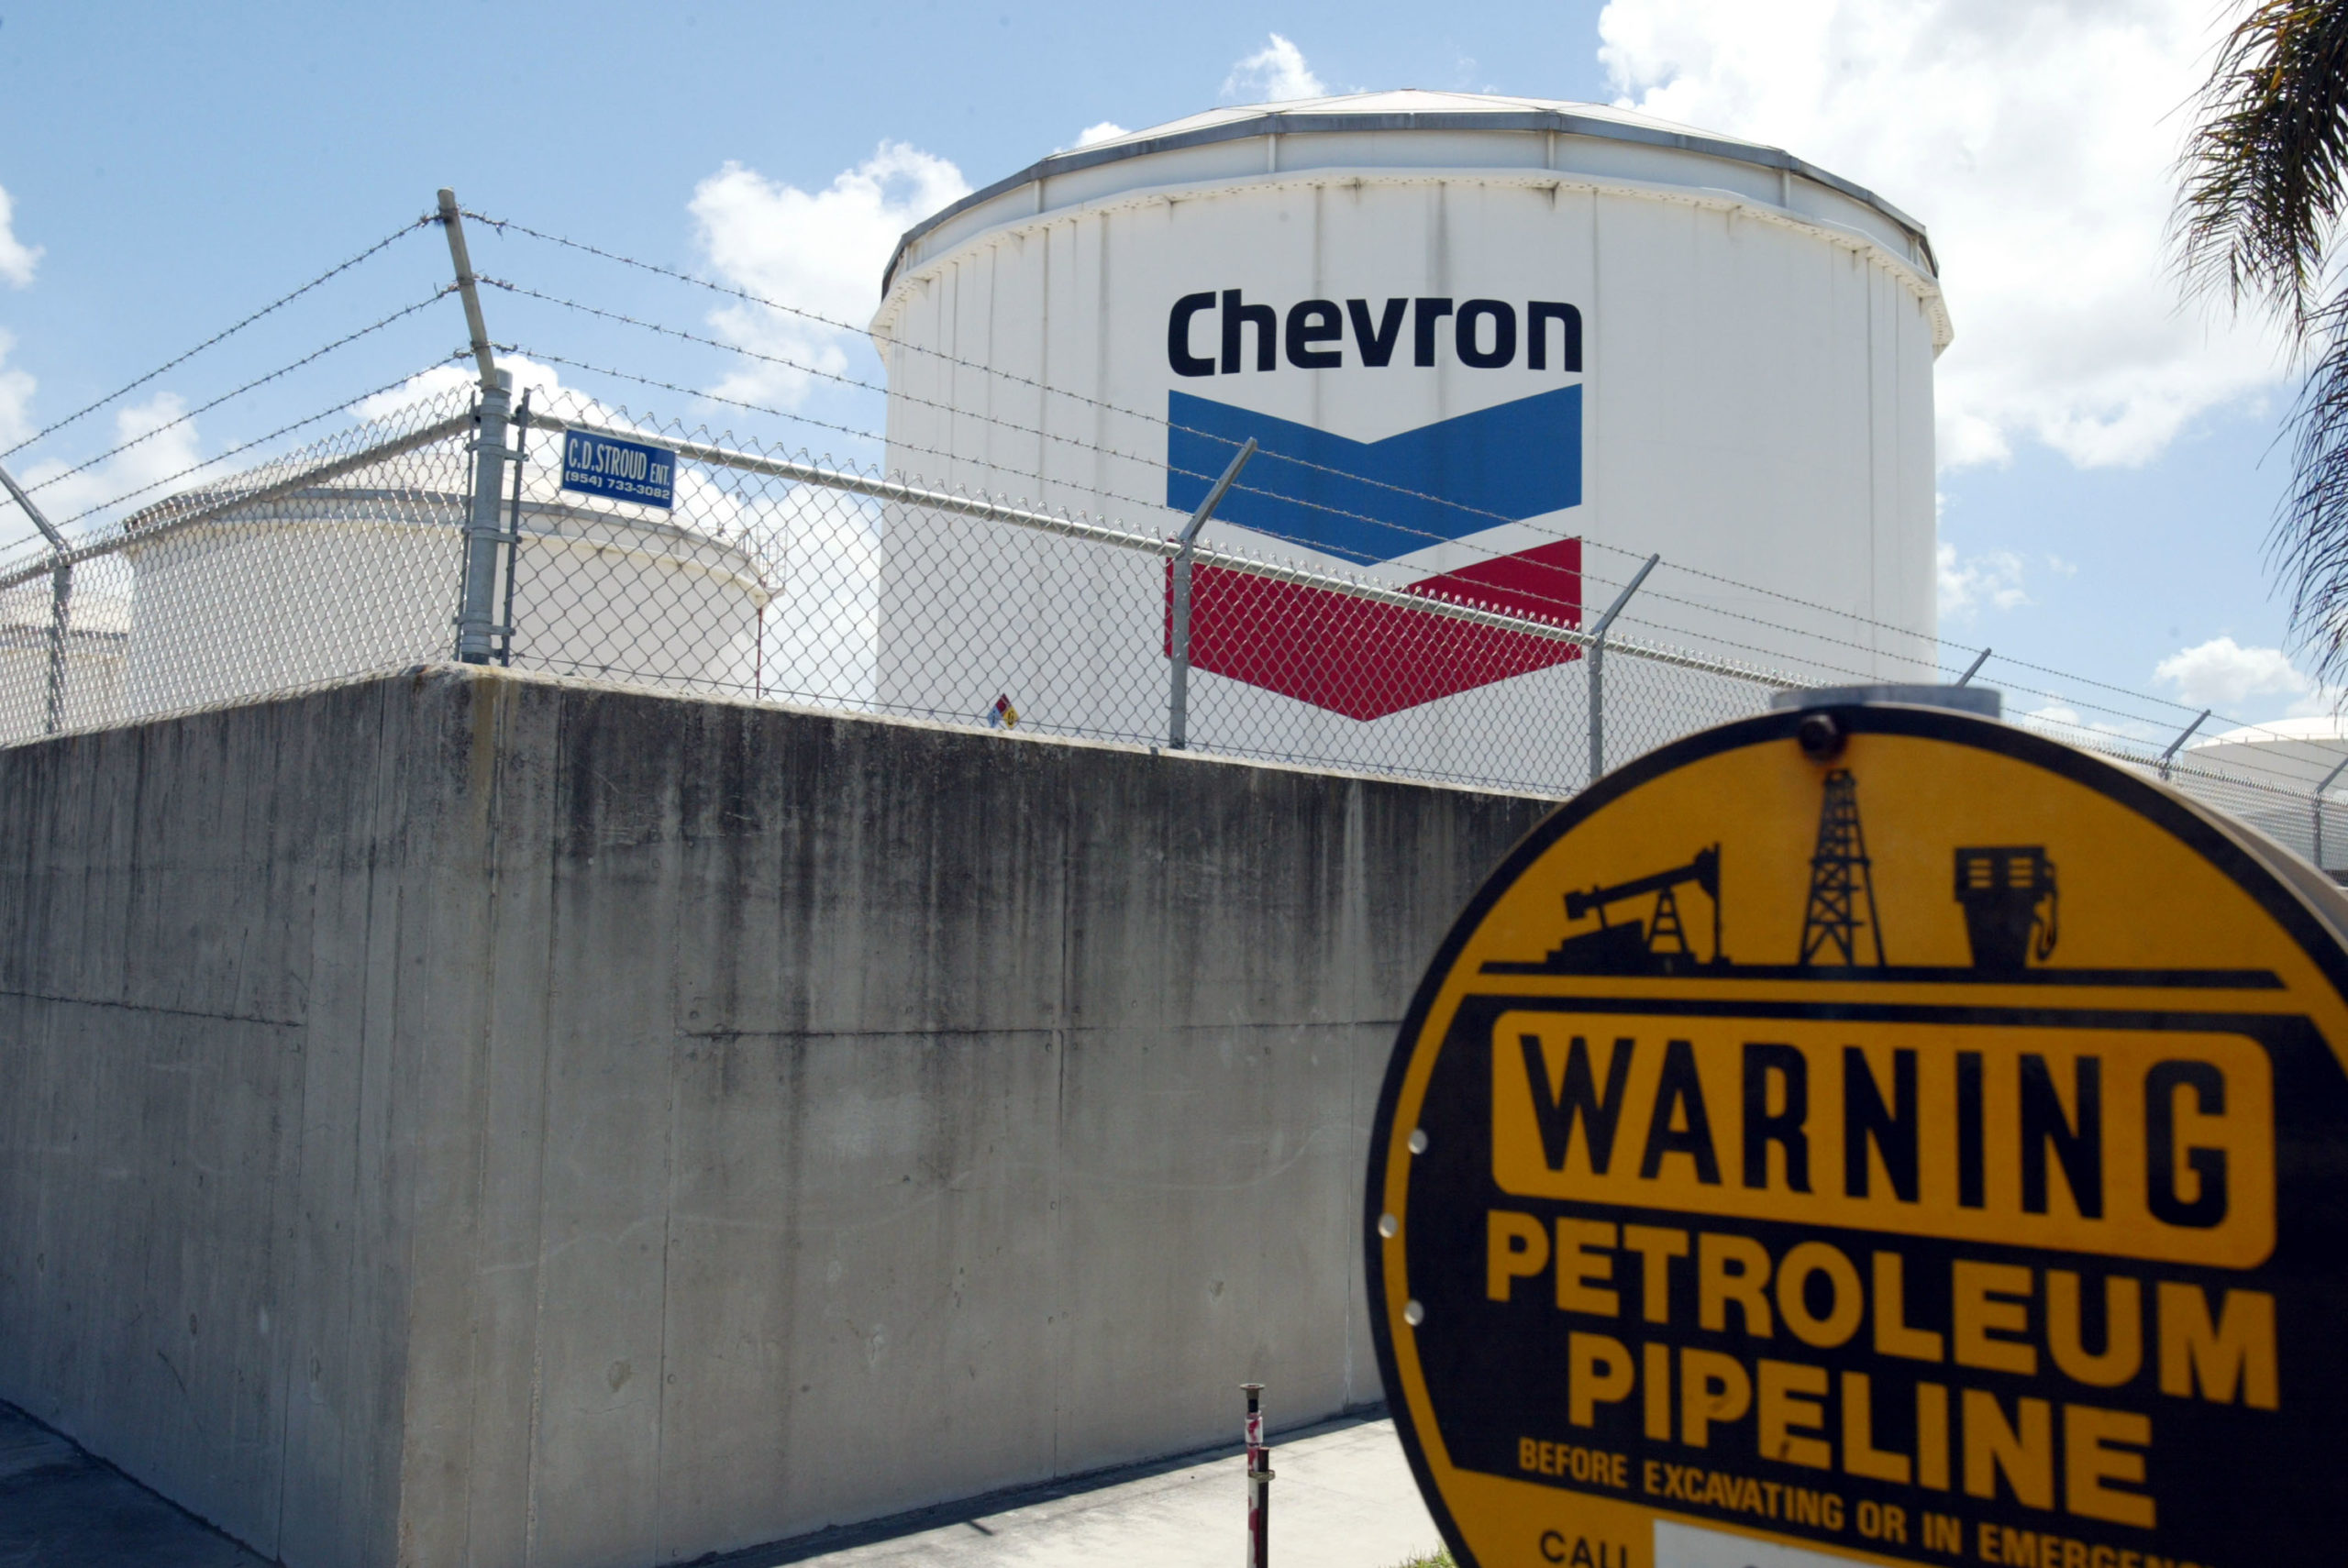 A Chevron petroleum storage tank is seen at Port Everglades in Fort Lauderdale, Florida. (Joe Raedle/Getty Images)